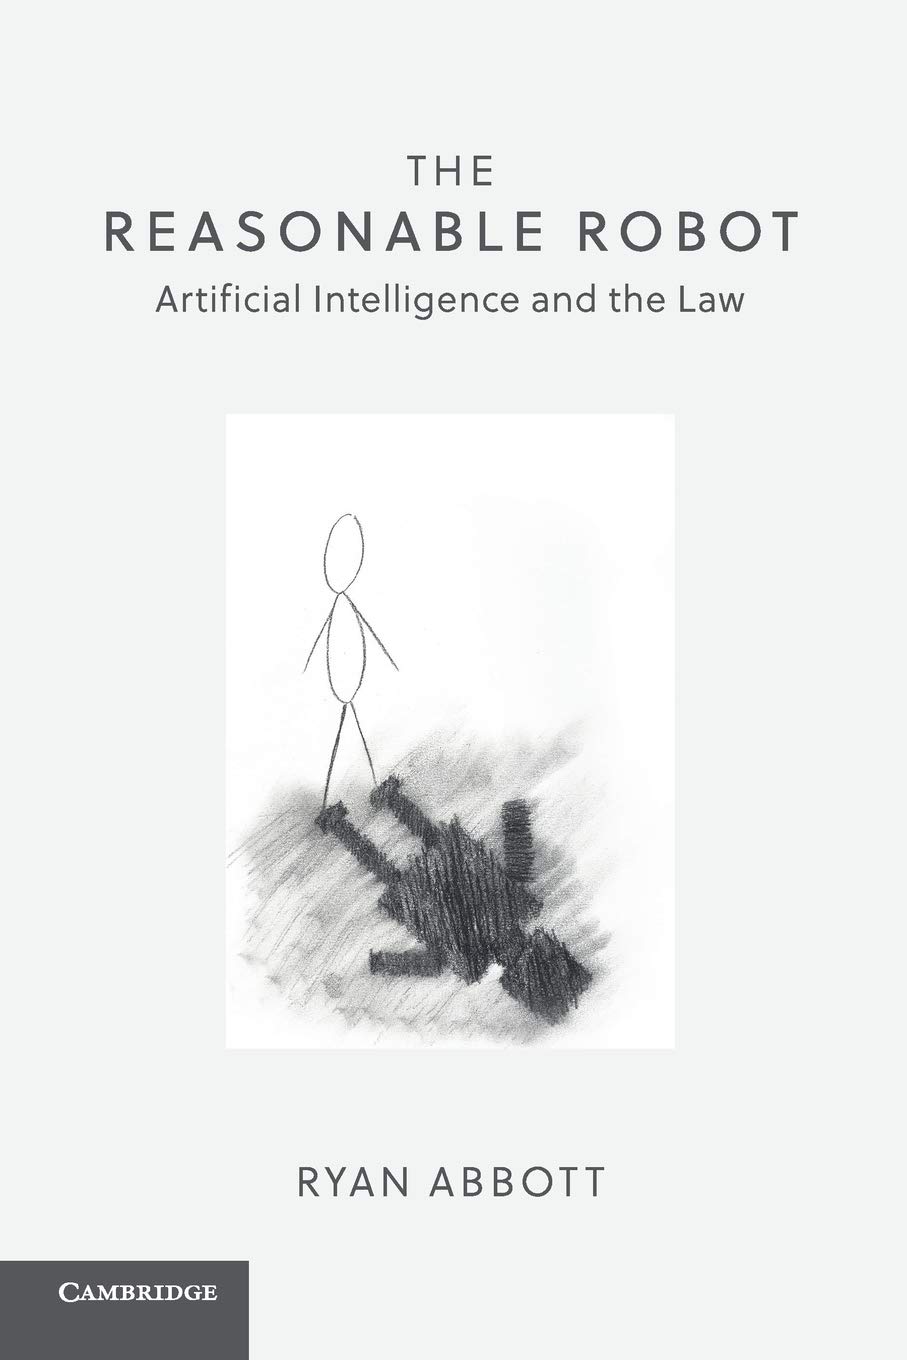 The Reasonable Robot: Artificial Intelligence and the Law (Cambridge University Press, 2020) by Ryan Abbott, Professor of Law and Health Sciences at the University of Surrey School of Law and Adjunct Assistant Professor of Medicine at the David Geffen School of Medicine at UCLA